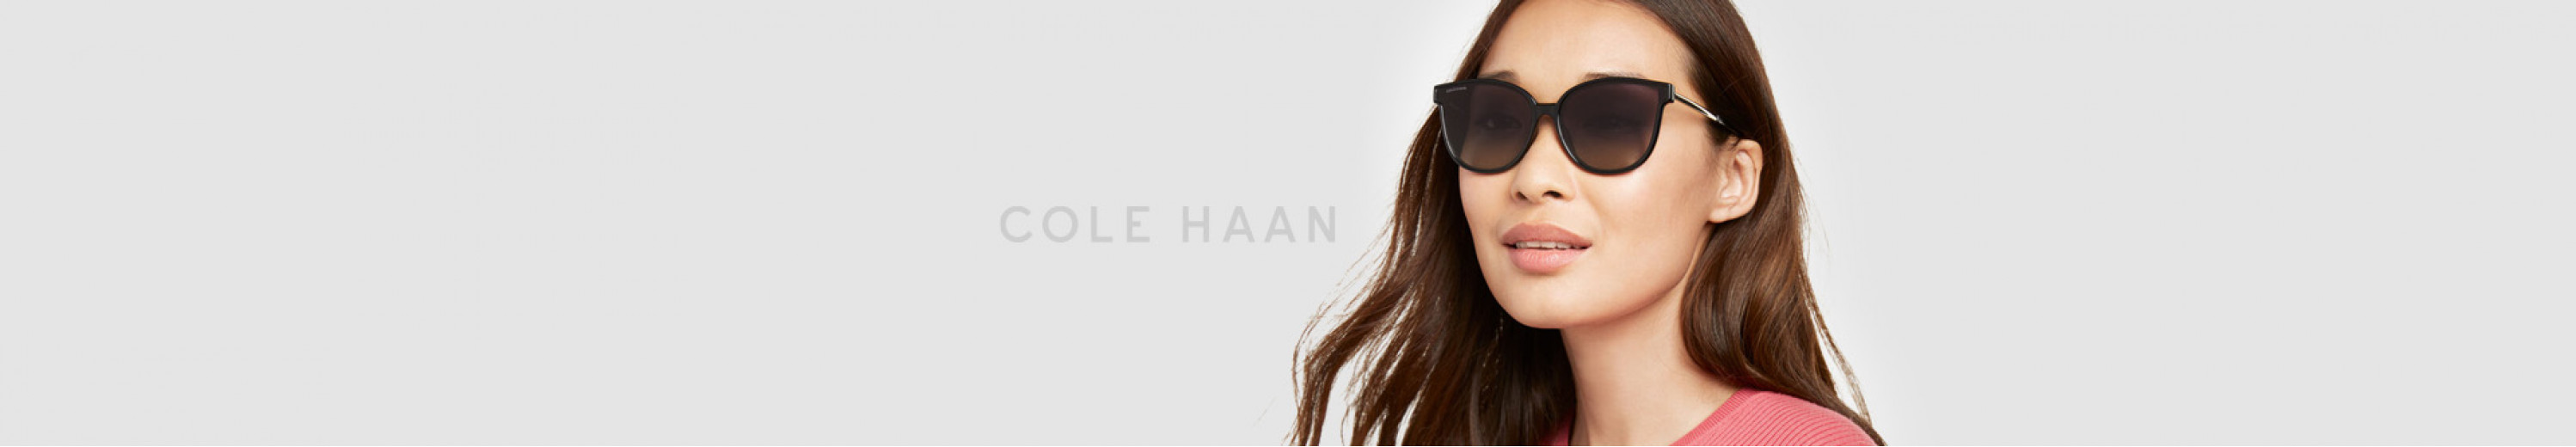 Cole Haan Sunglasses for Women